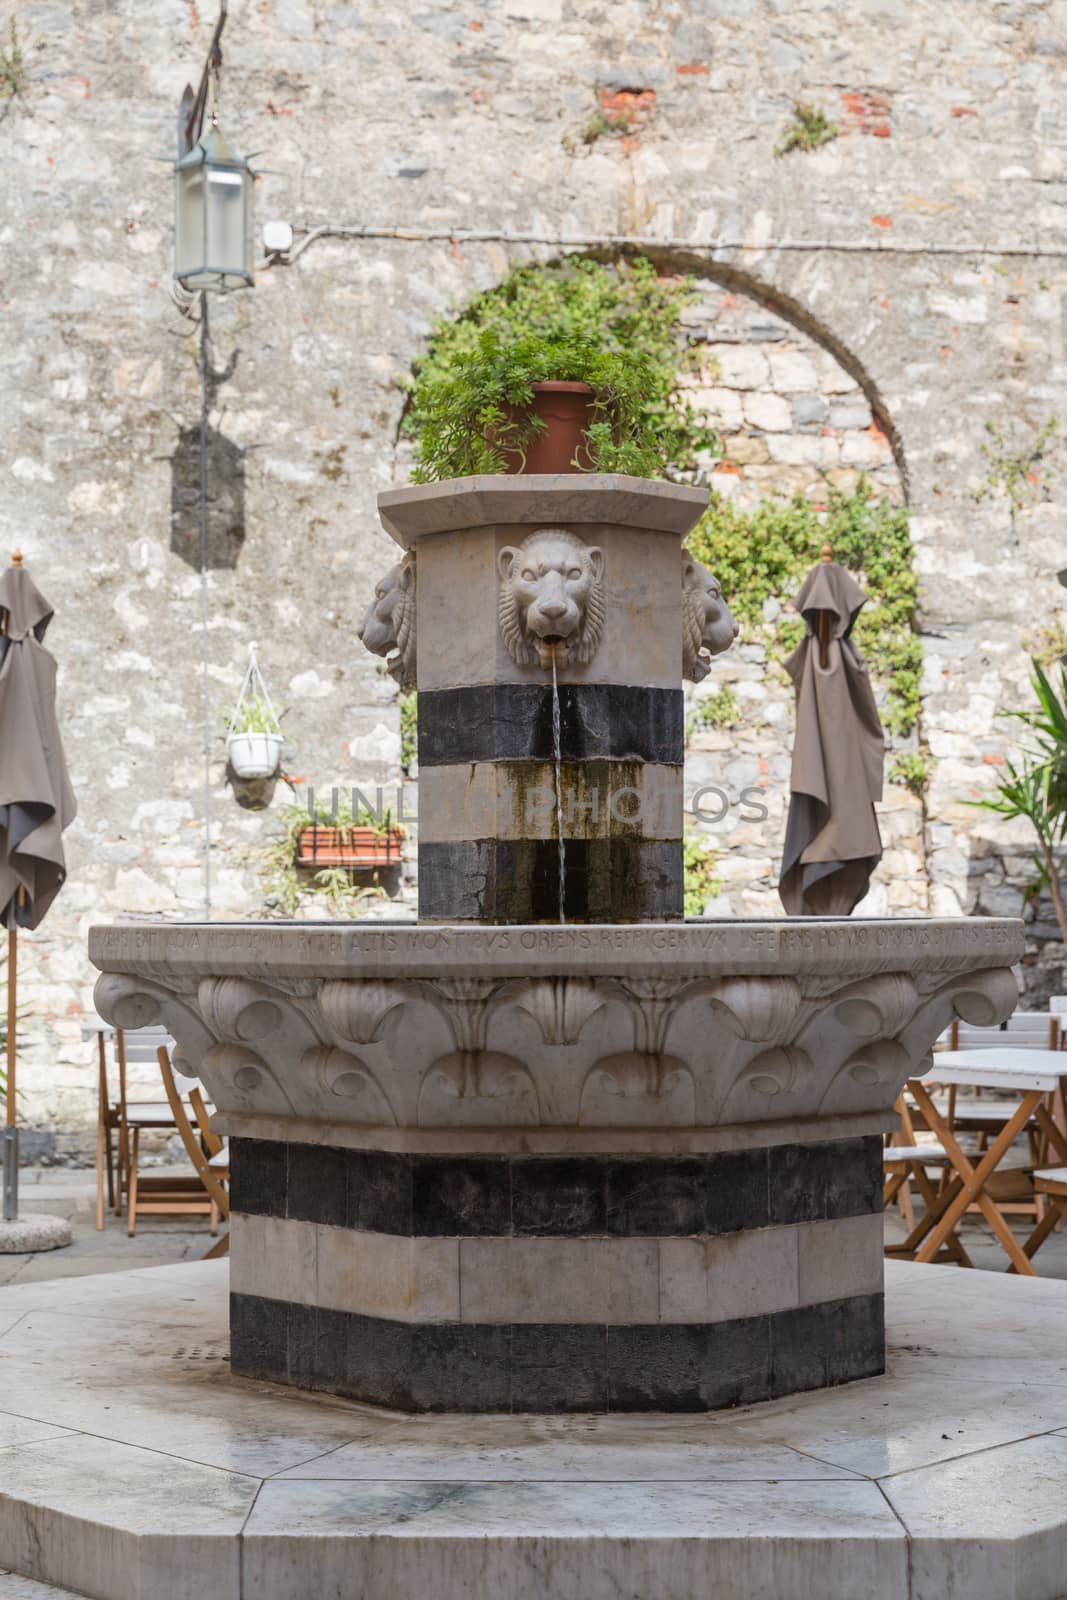 Fountain in Portovenere in the Ligurian region of Italy by chrisukphoto